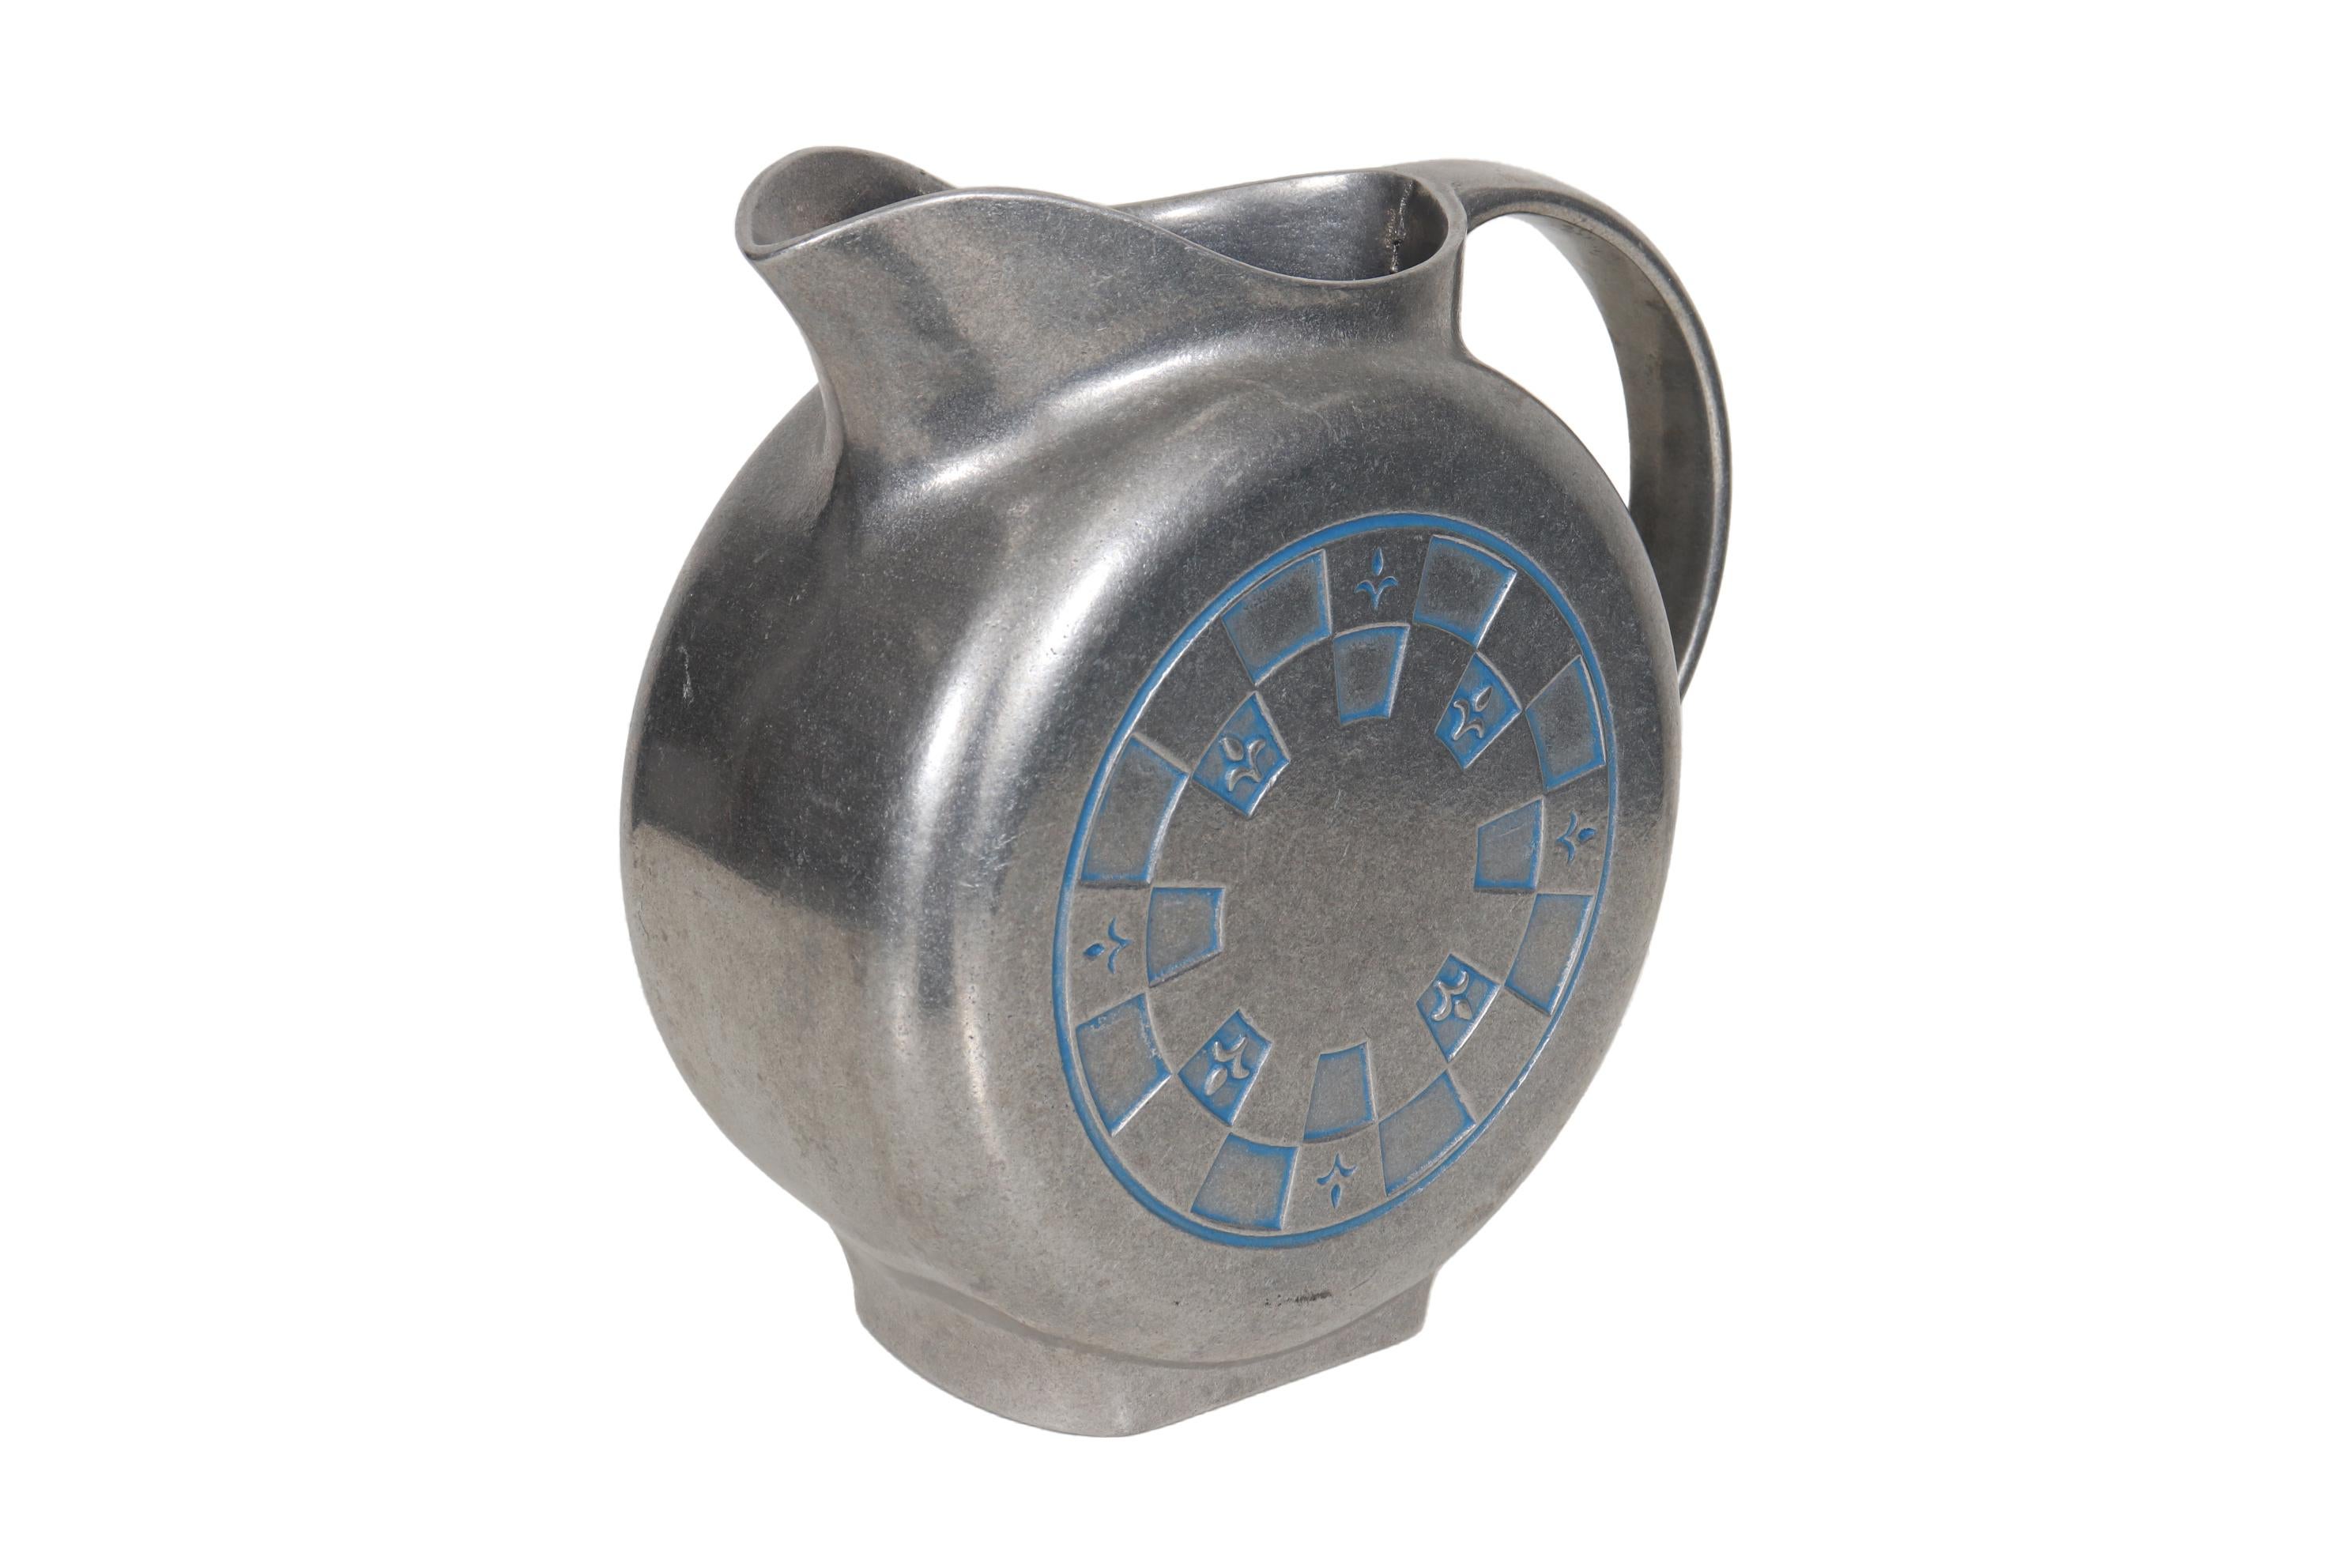 A cast armetale water pitcher made by Wilton. Shaped like a canteen; round with flat sides. Decorated with an embossed checkered pattern with fleur de lis details in a matte pewter color, accented in blue. Marked underneath 